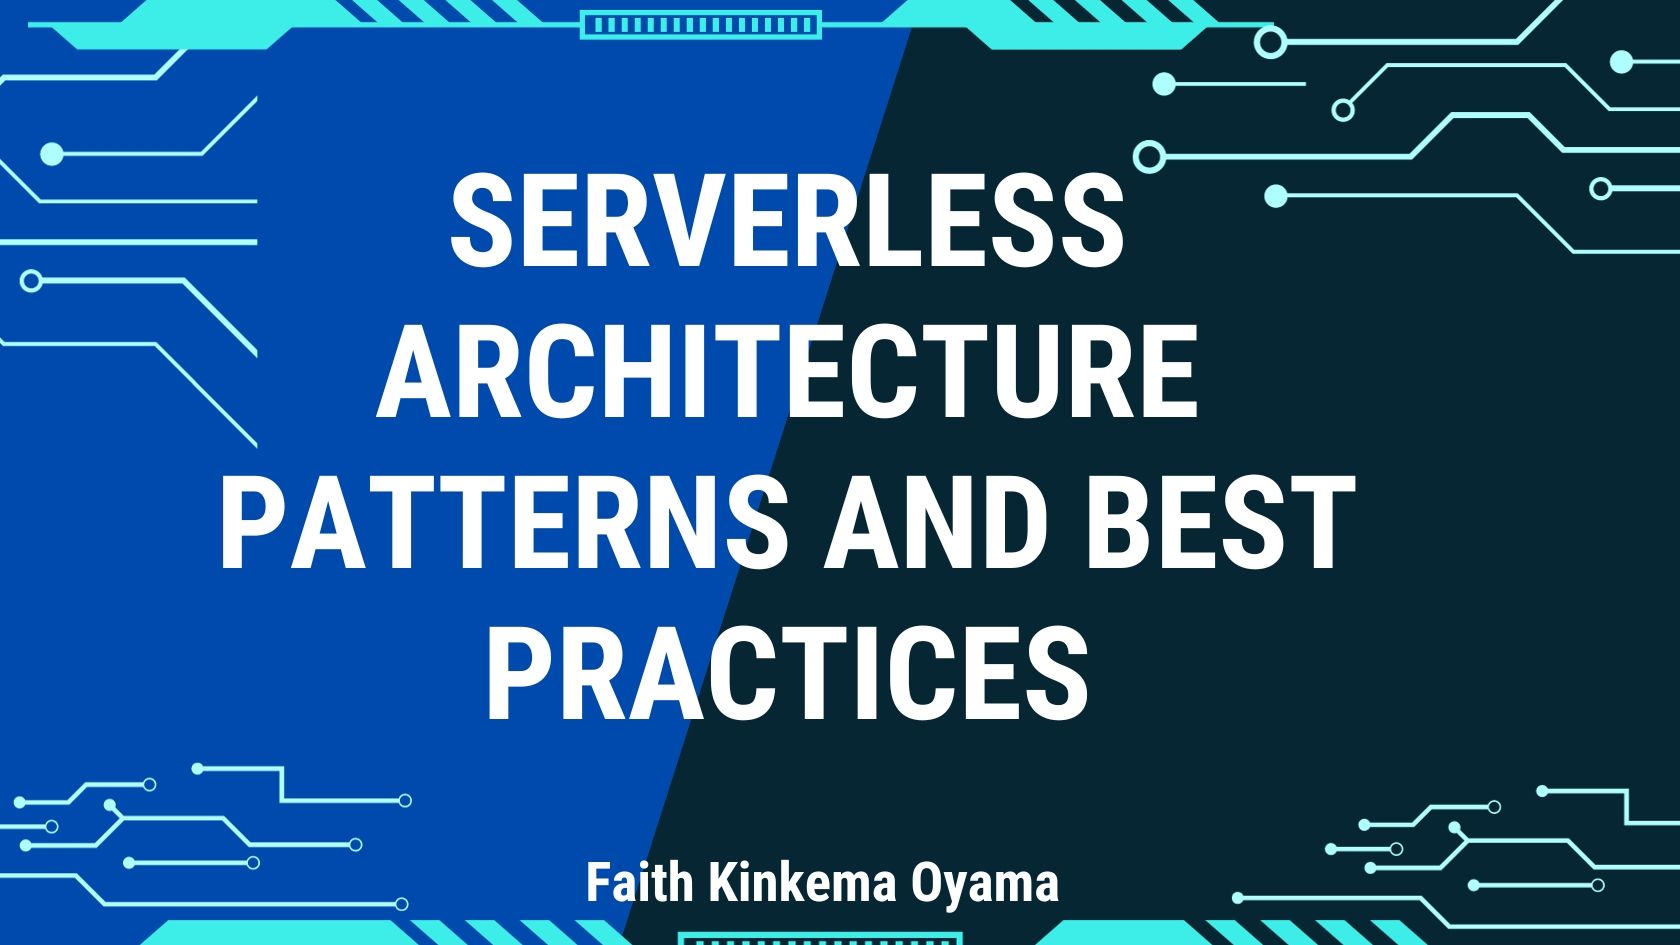 Serverless Architecture Patterns and Best Practices